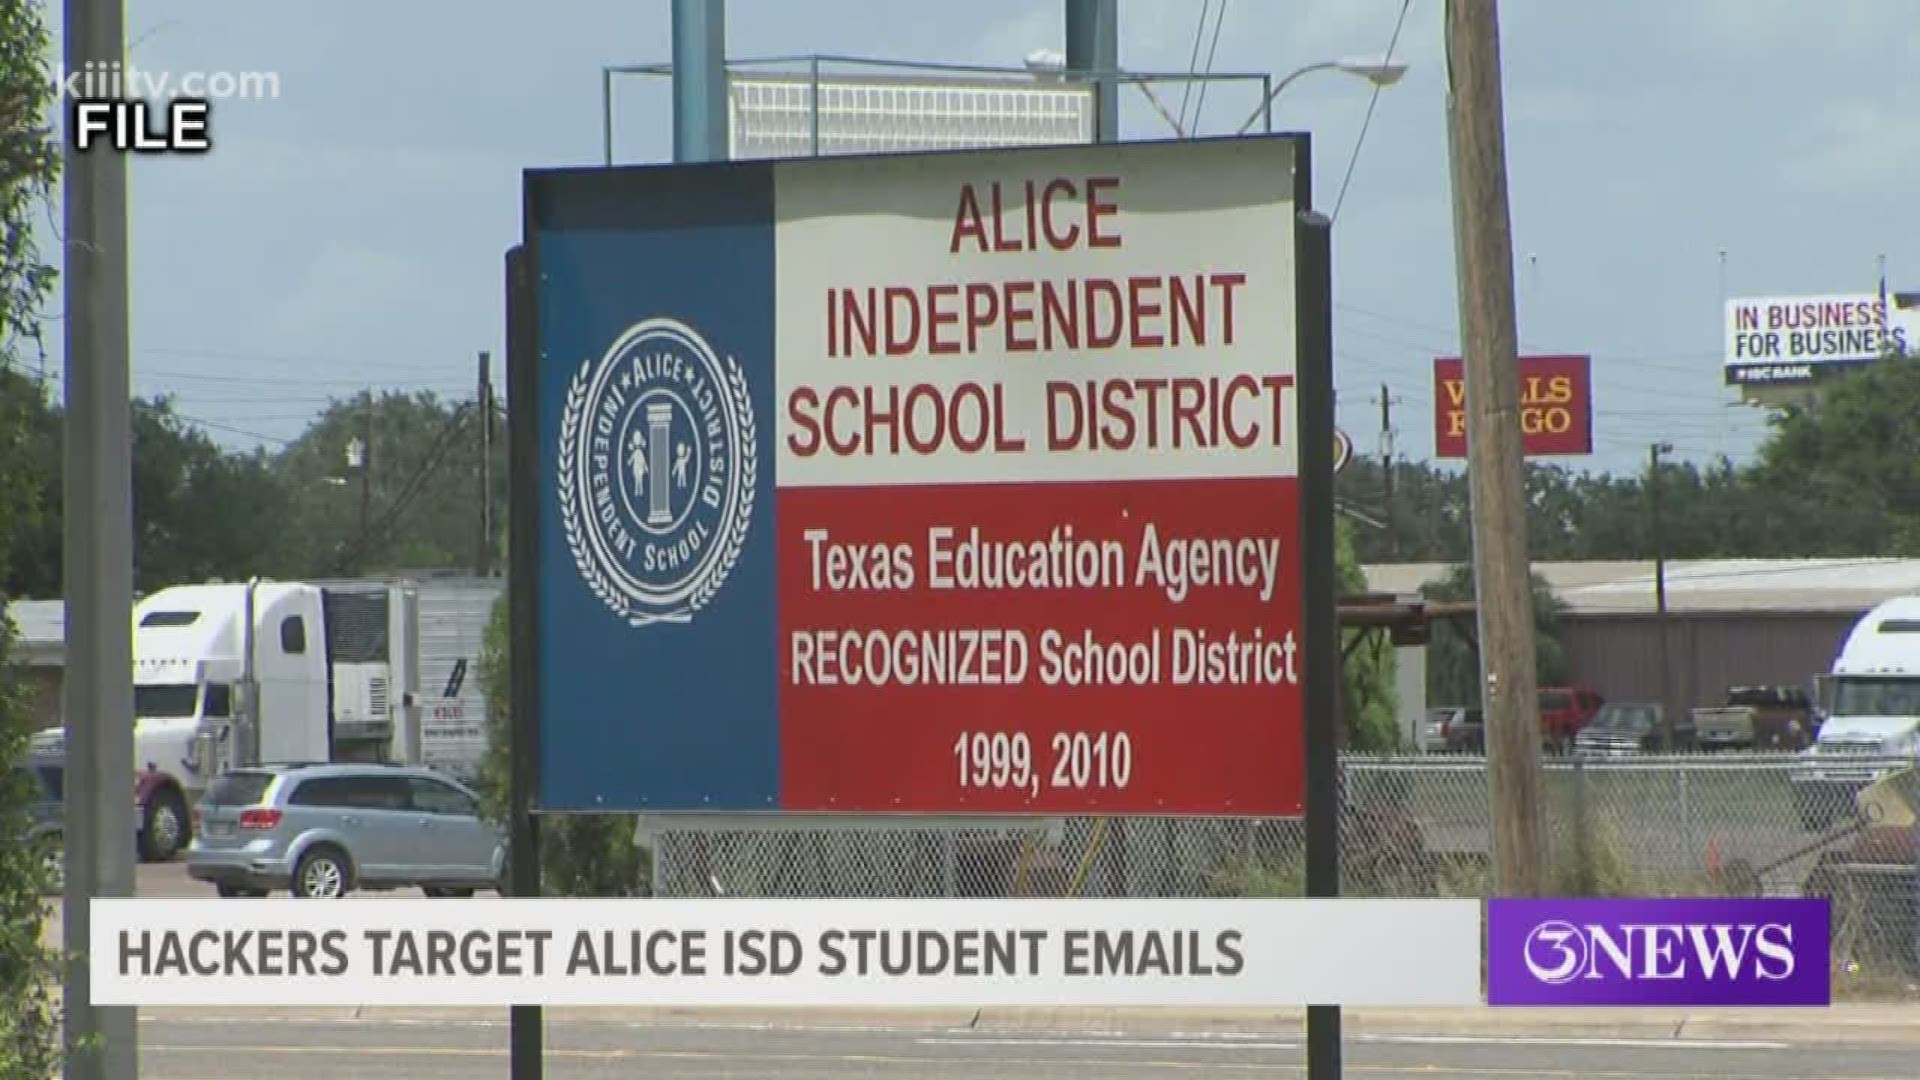 In a post on the district's Facebook page, officials say some inappropriate messages were sent to students.